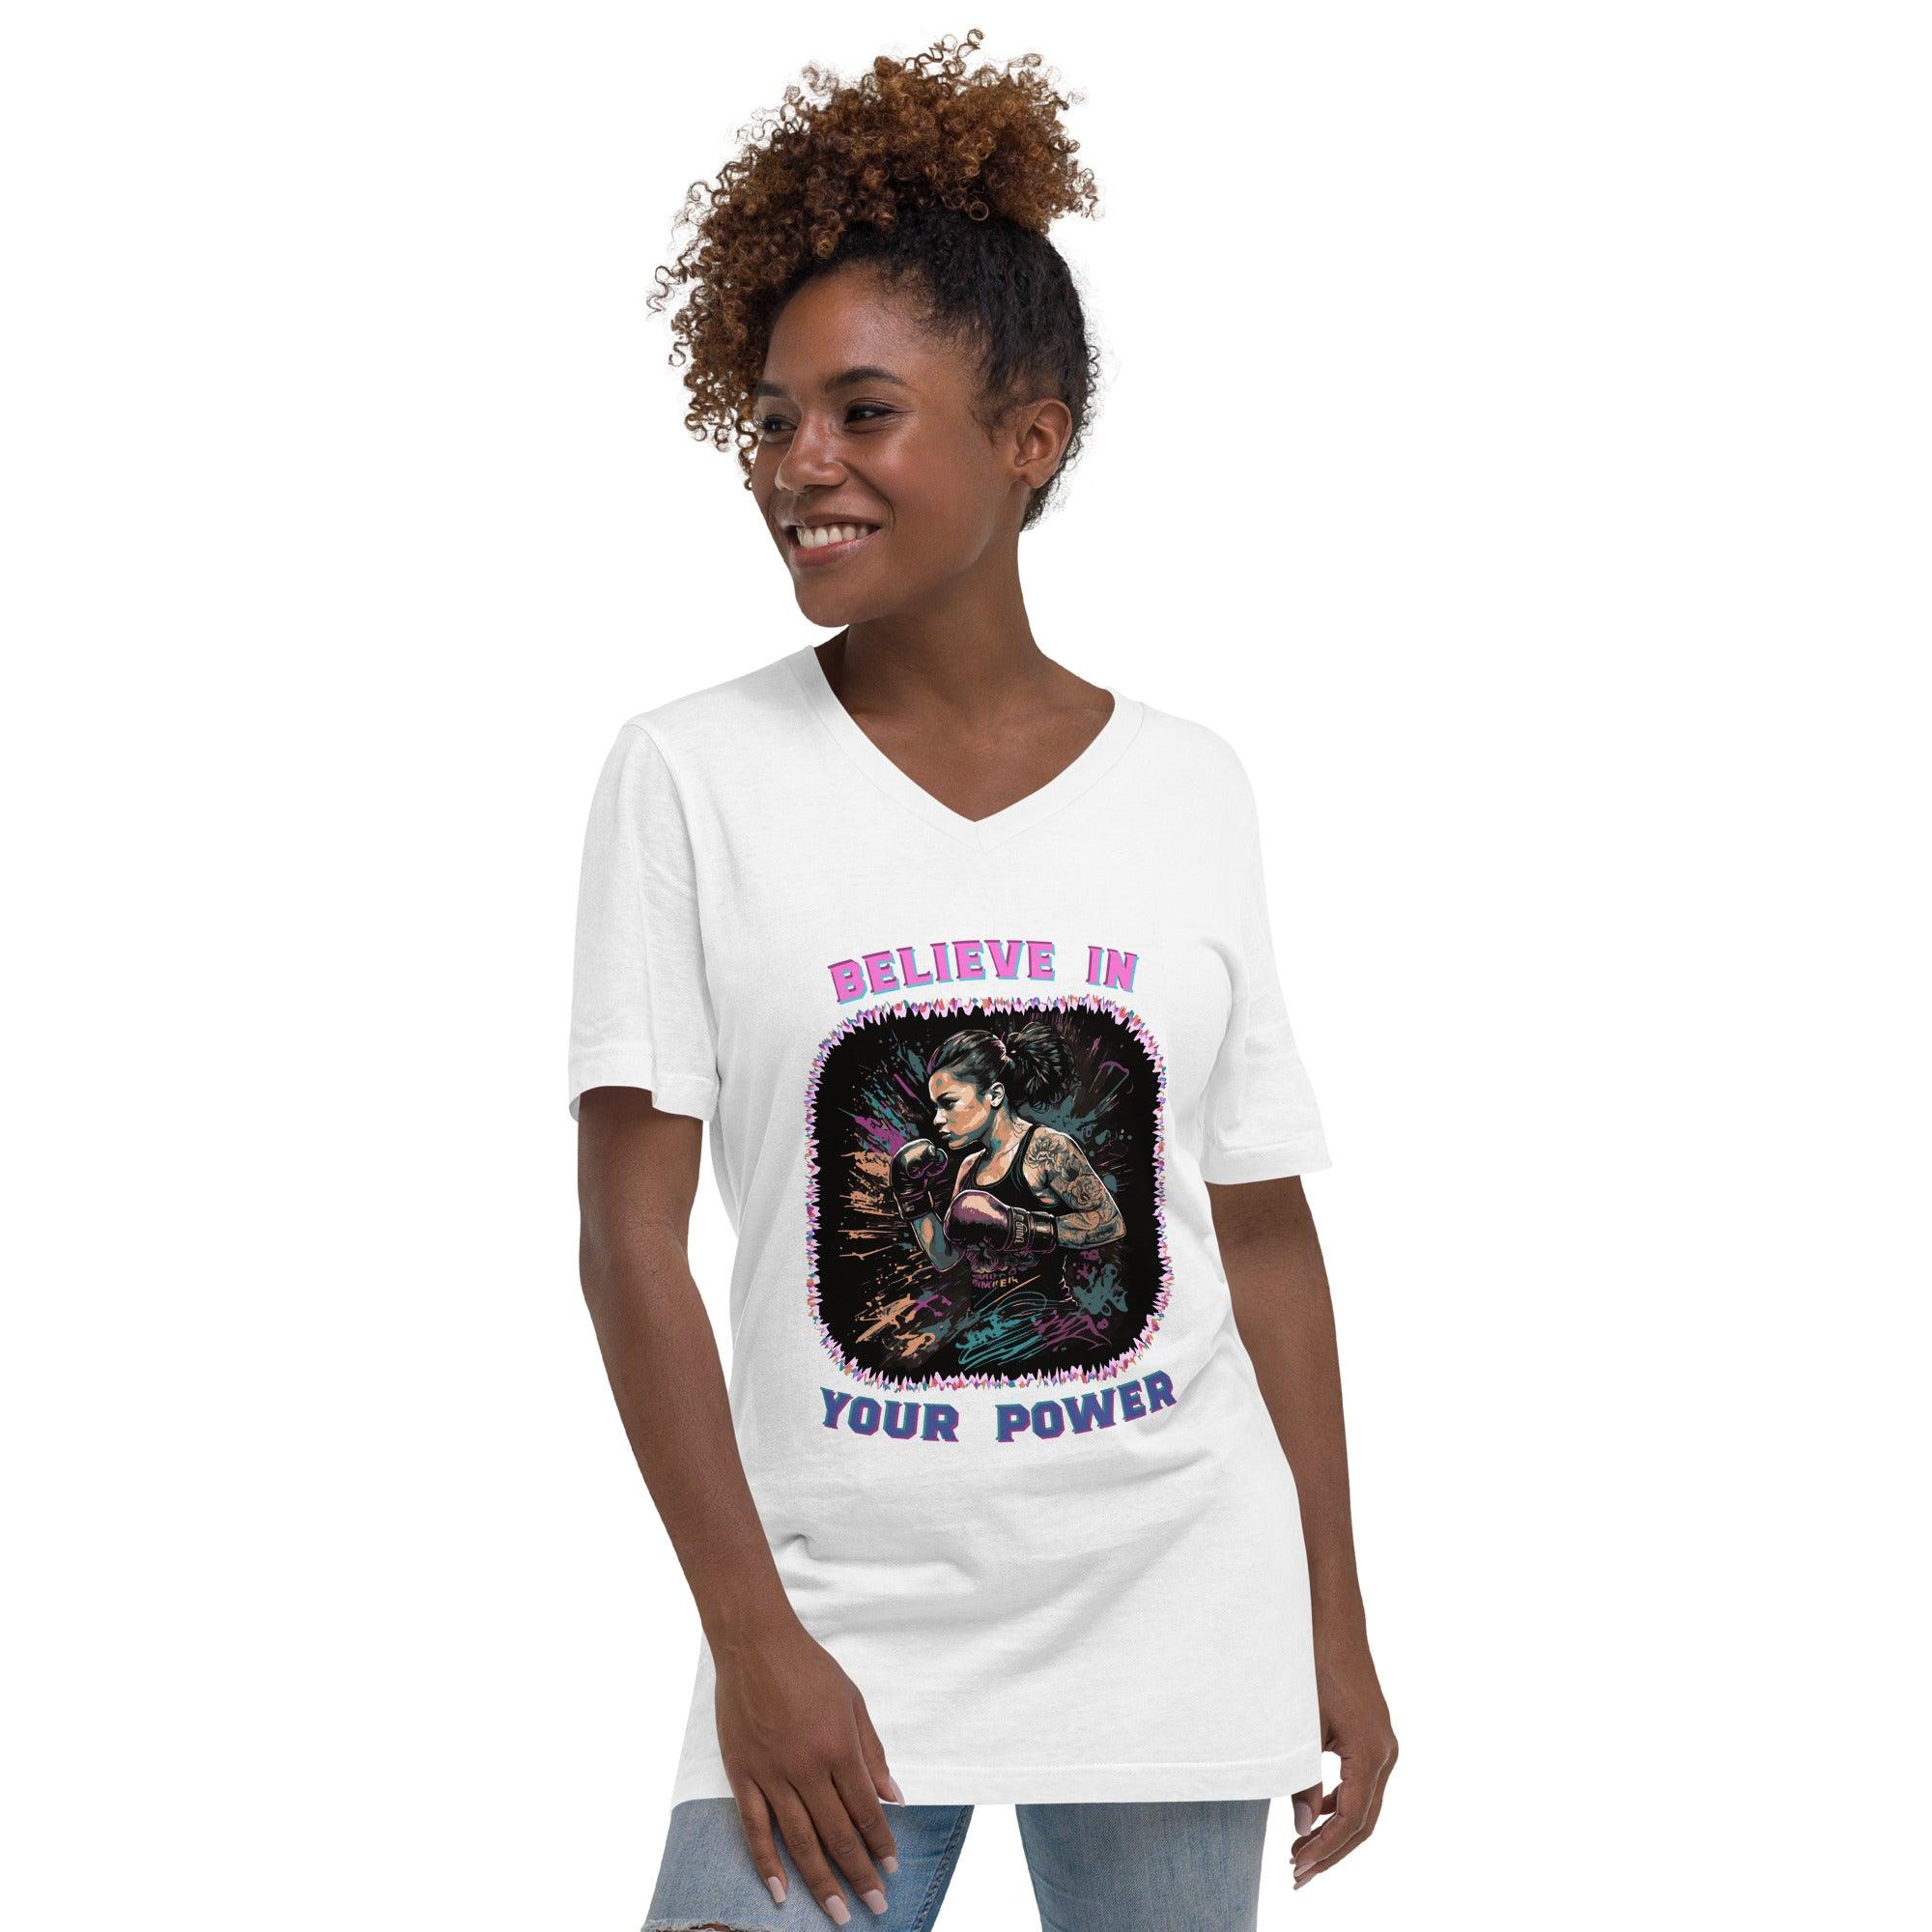 Believe In Your Power Unisex Short Sleeve V-Neck T-Shirt - Beyond T-shirts